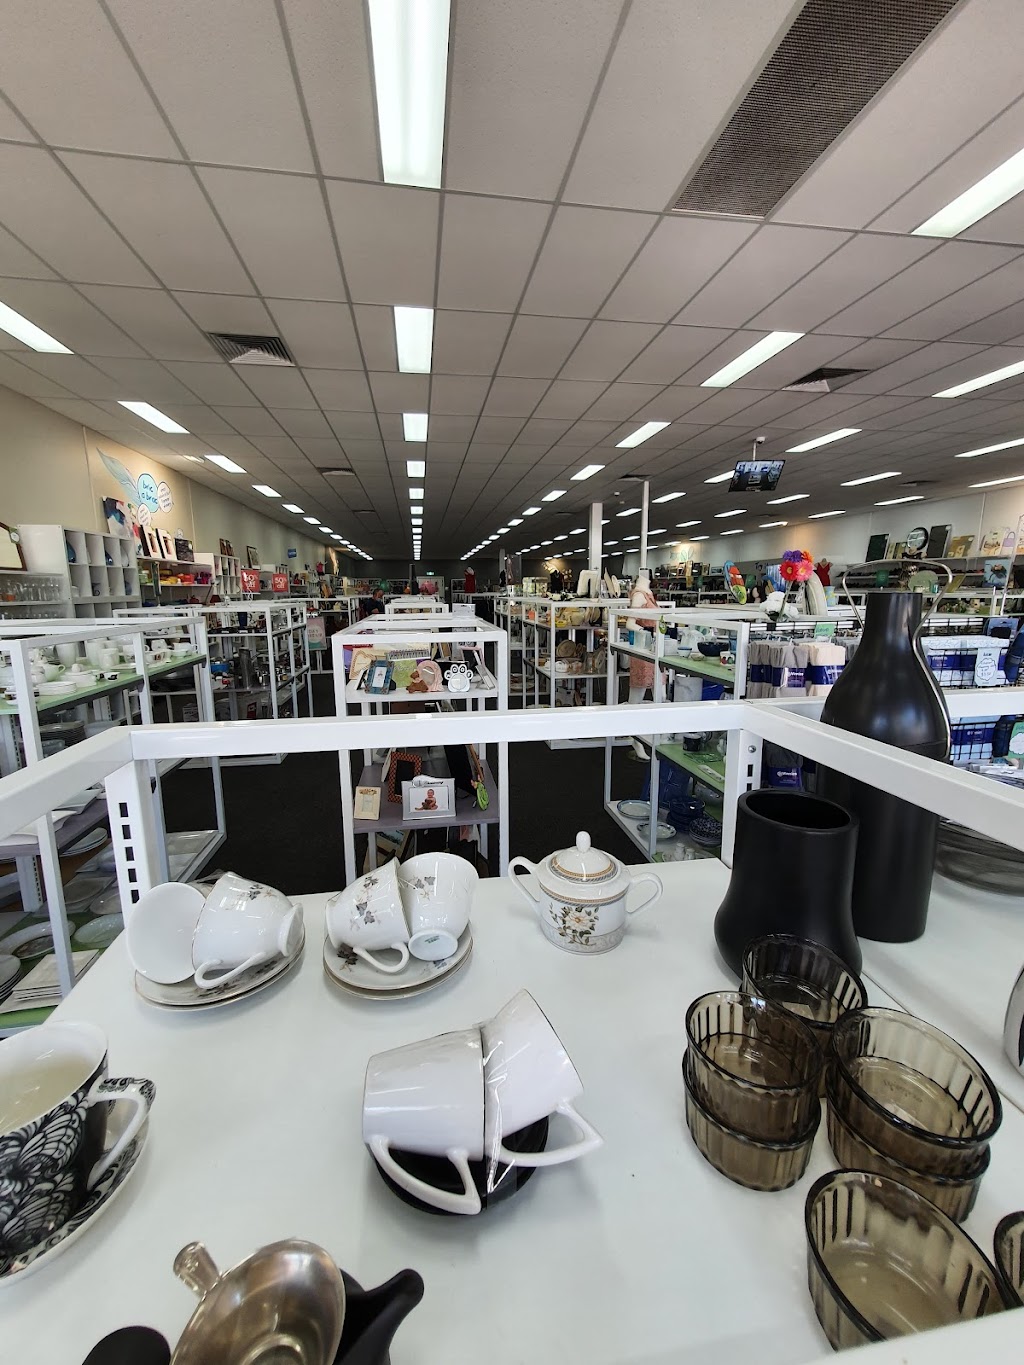 Vinnies Epping | store | 4/500 High St, Epping VIC 3076, Australia | 0384053360 OR +61 3 8405 3360